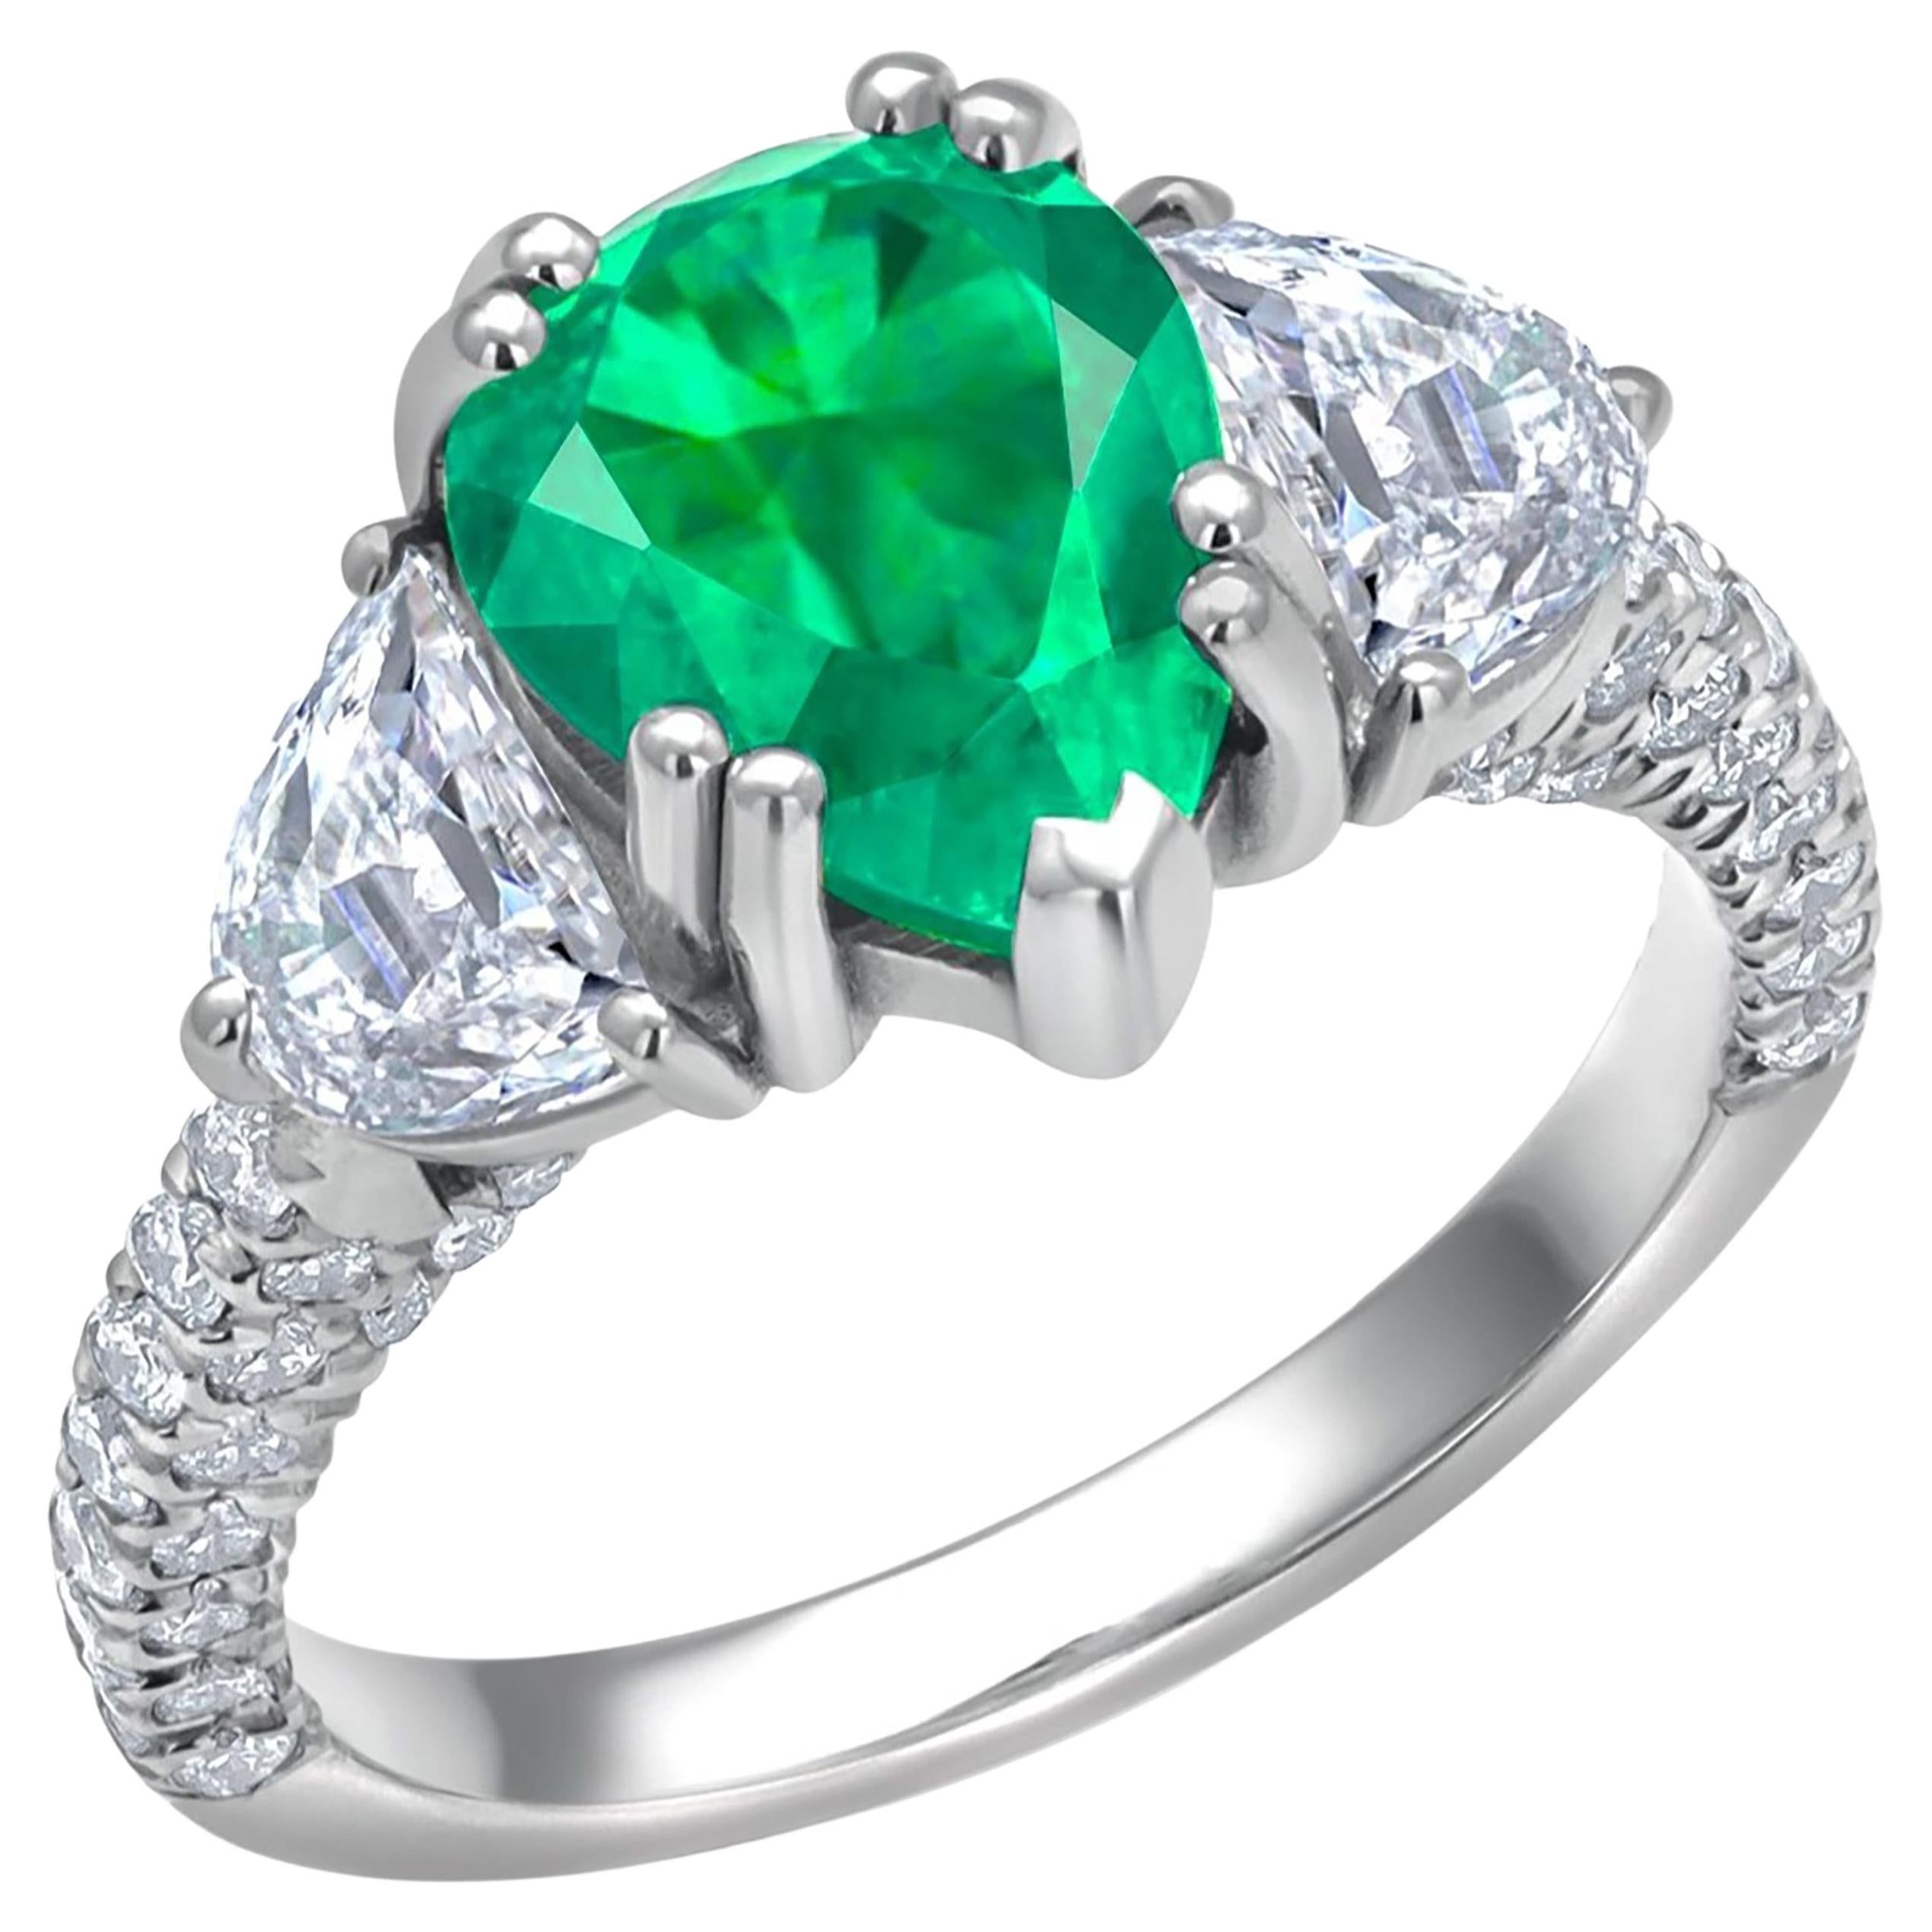 GIA Certified Colombian Pear Emerald Diamond 3.35 Carat 18 Karat Gold Ring For Sale